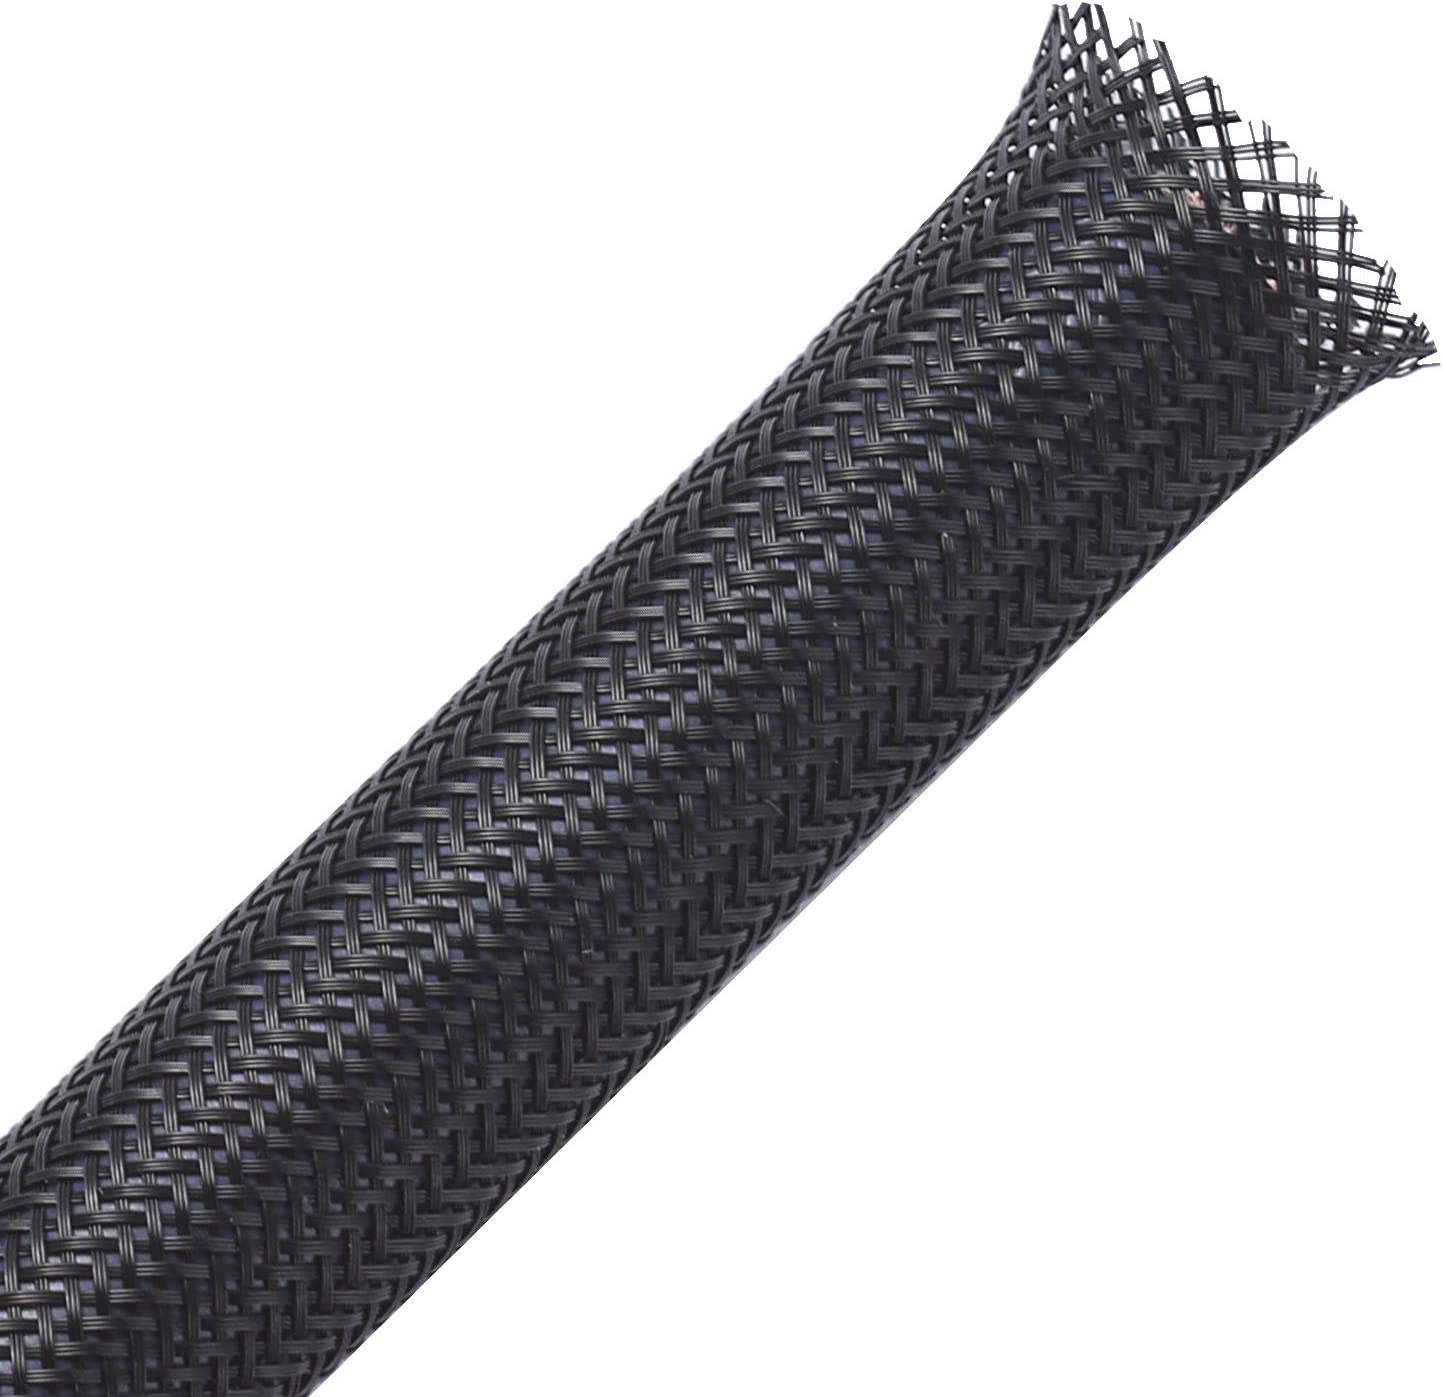 50ft - 1/4 inch & 1/2 inch PET Expandable Braided Sleeving - BlacK (LNC)